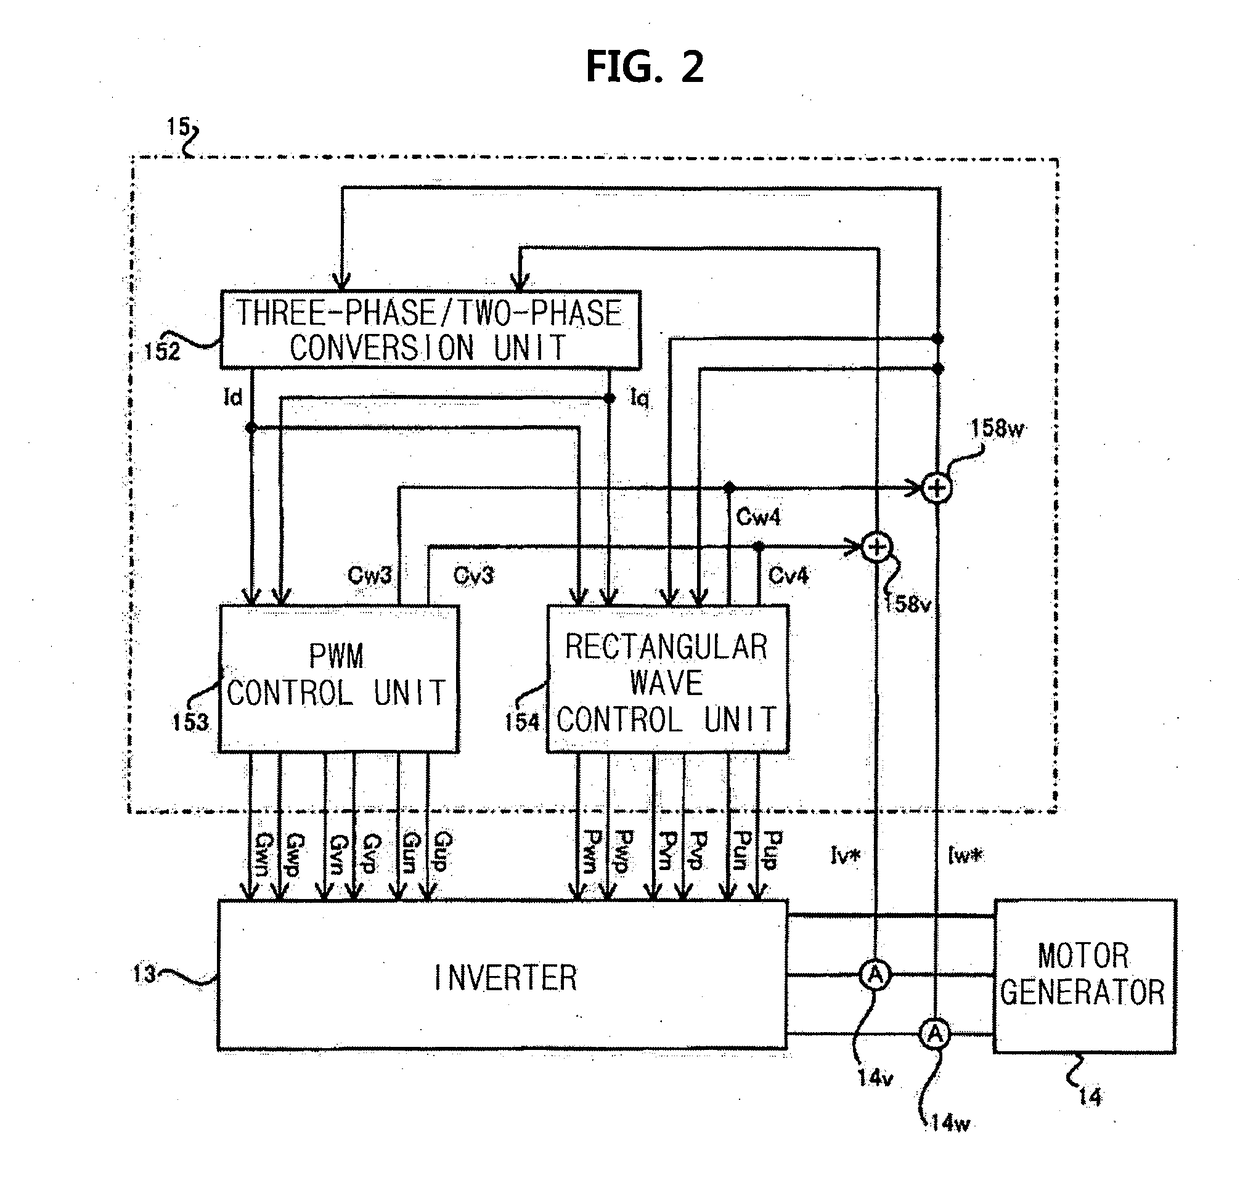 Controller for electric motor system